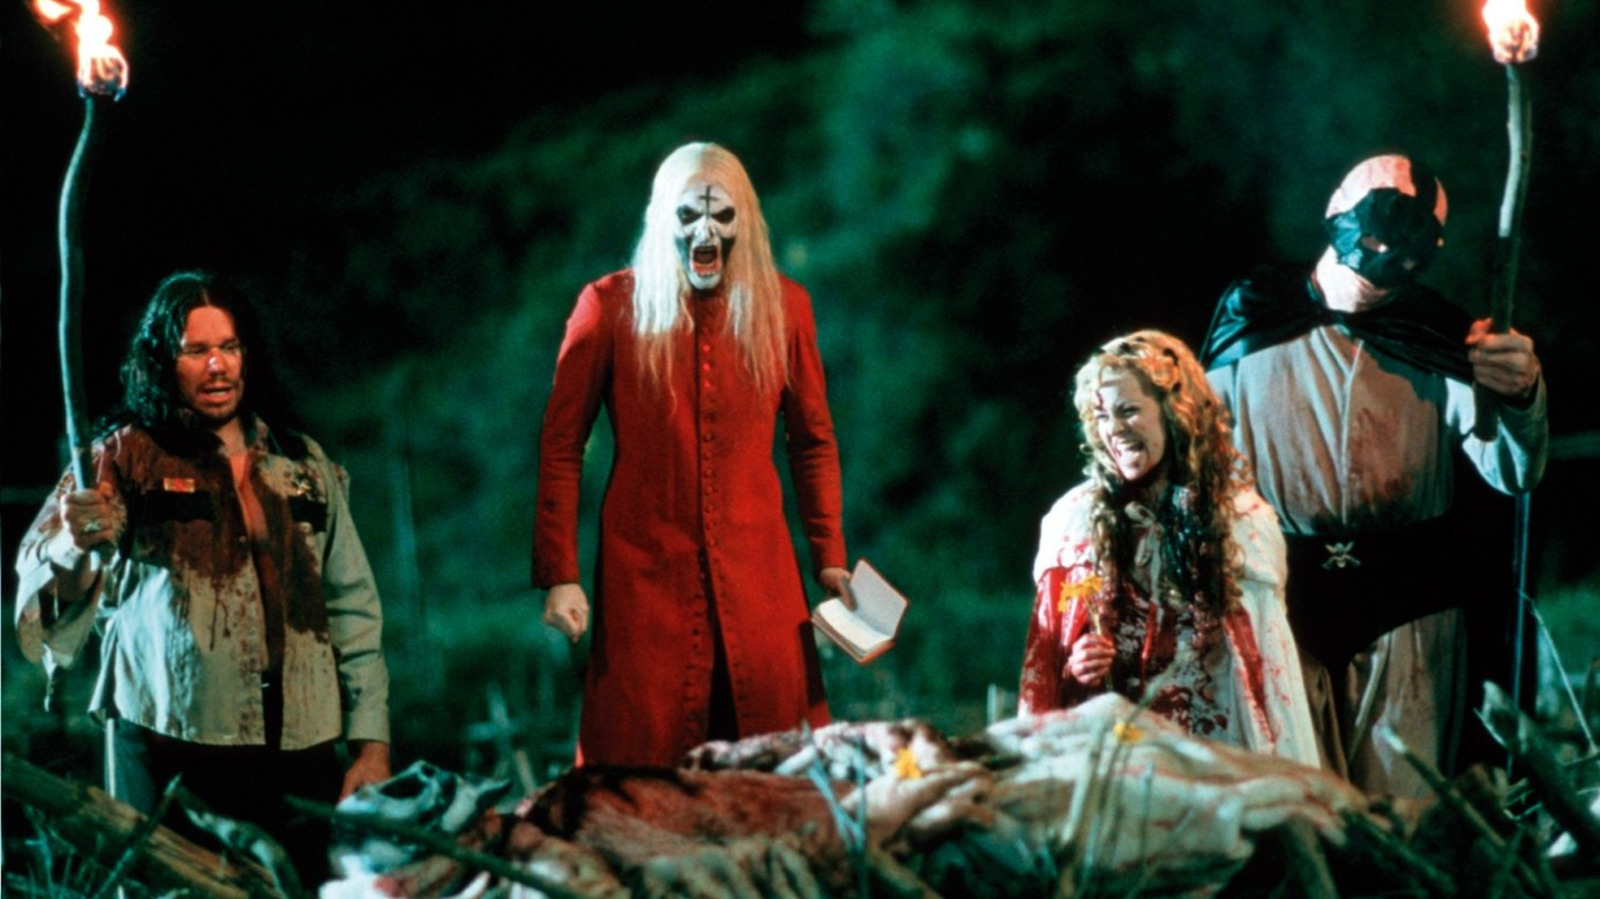 Why We’ll Never See a House of 1,000 Extended Cut Corpses, According to Rob Zombie